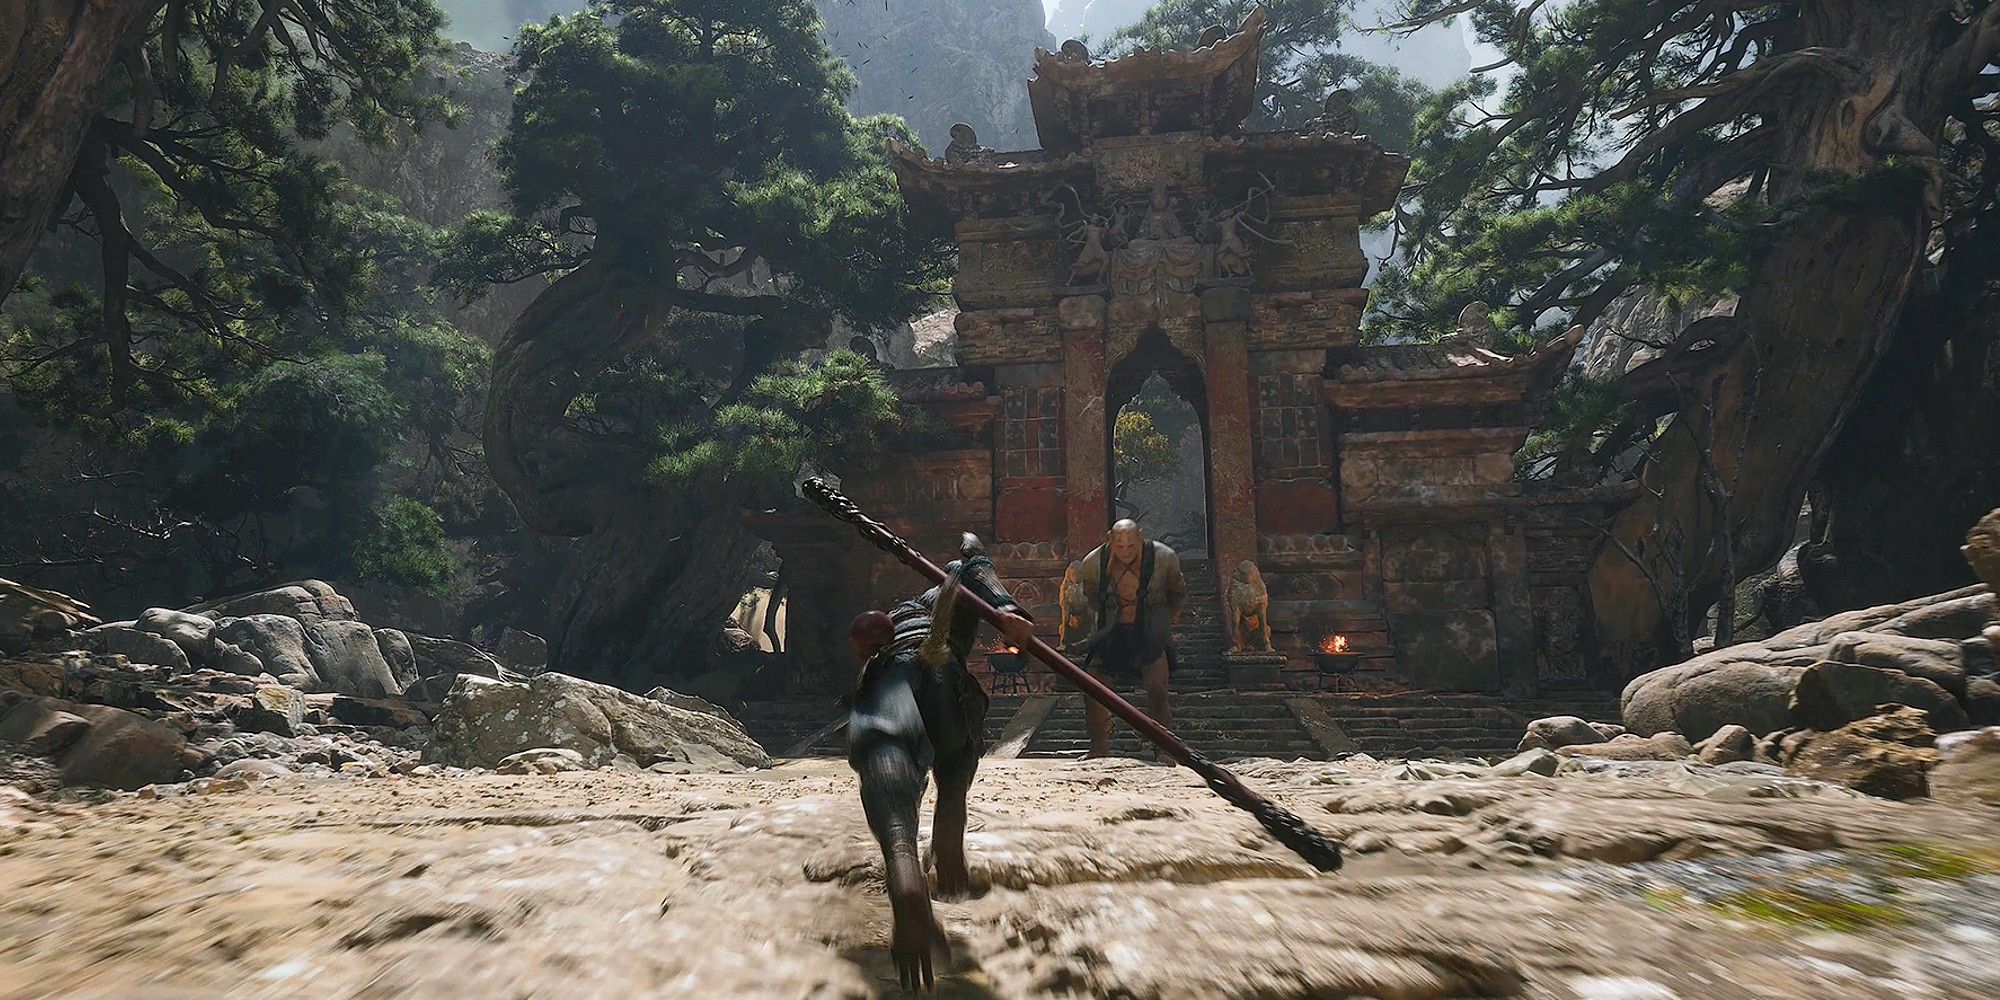 Monkey King With His Staff Running Towards Ancient Ruins Where The Enemy Can Be Seen